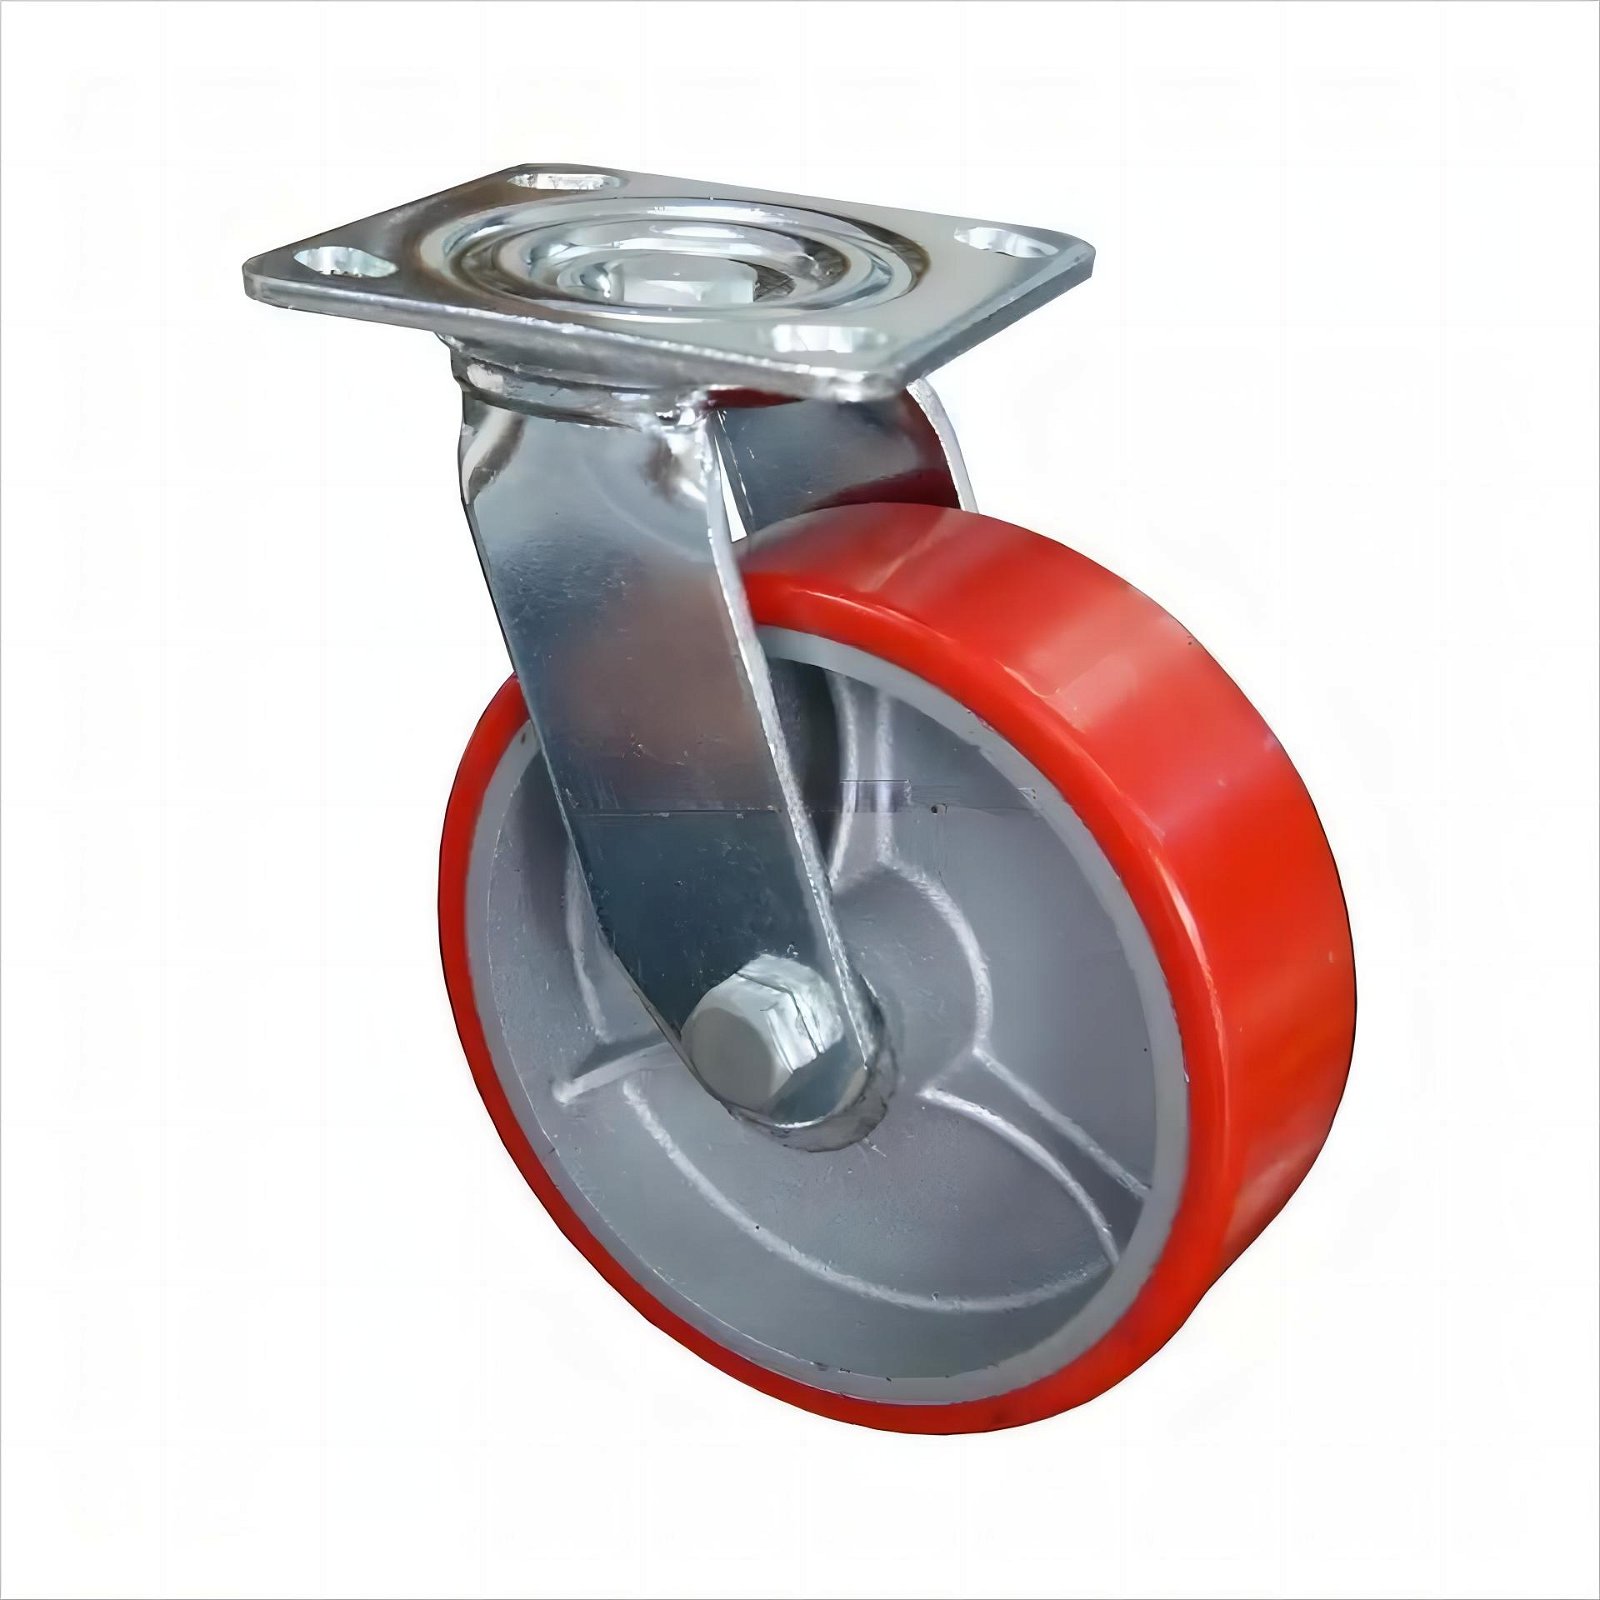 6 "iron core red PU trolley casters 3